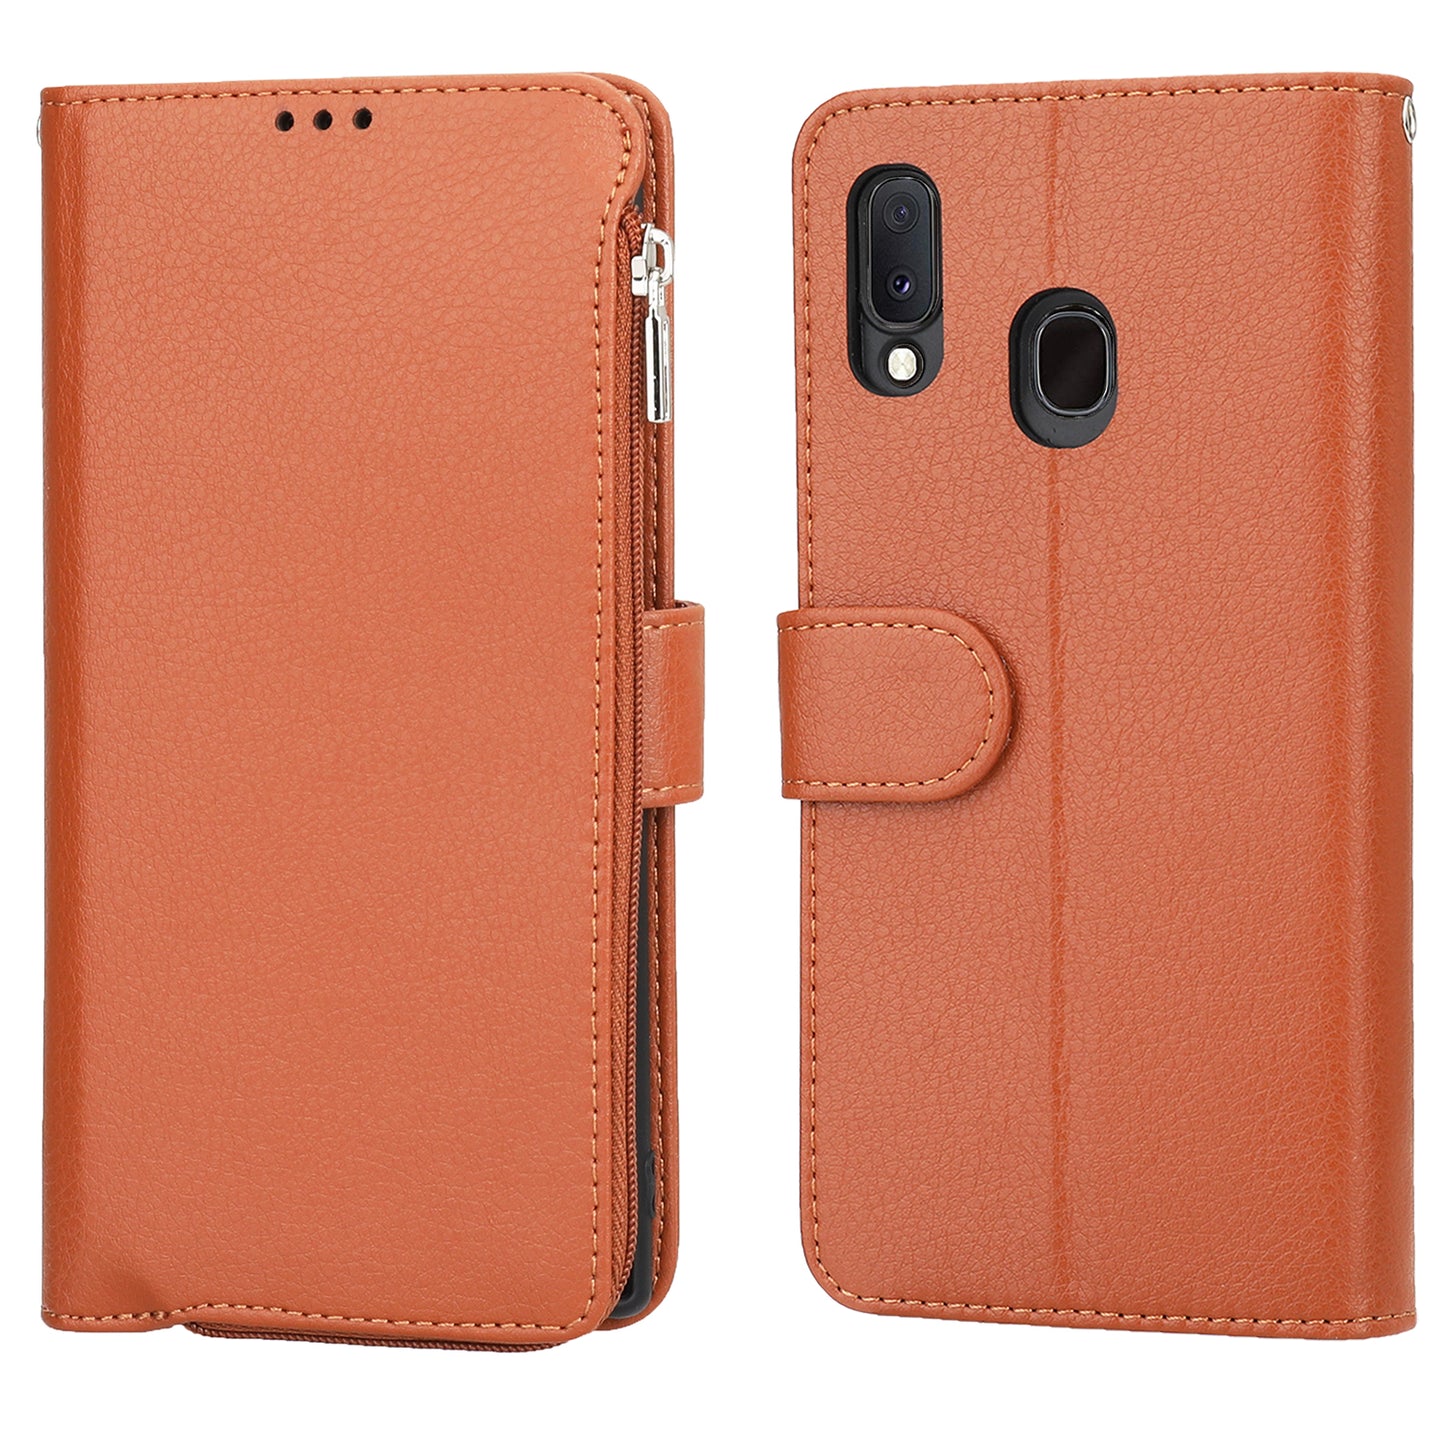 Samsung Galaxy A20 Leather Case Zipper Pouch TPU Fexible Stand Card Slots Magnetic Hand Strap